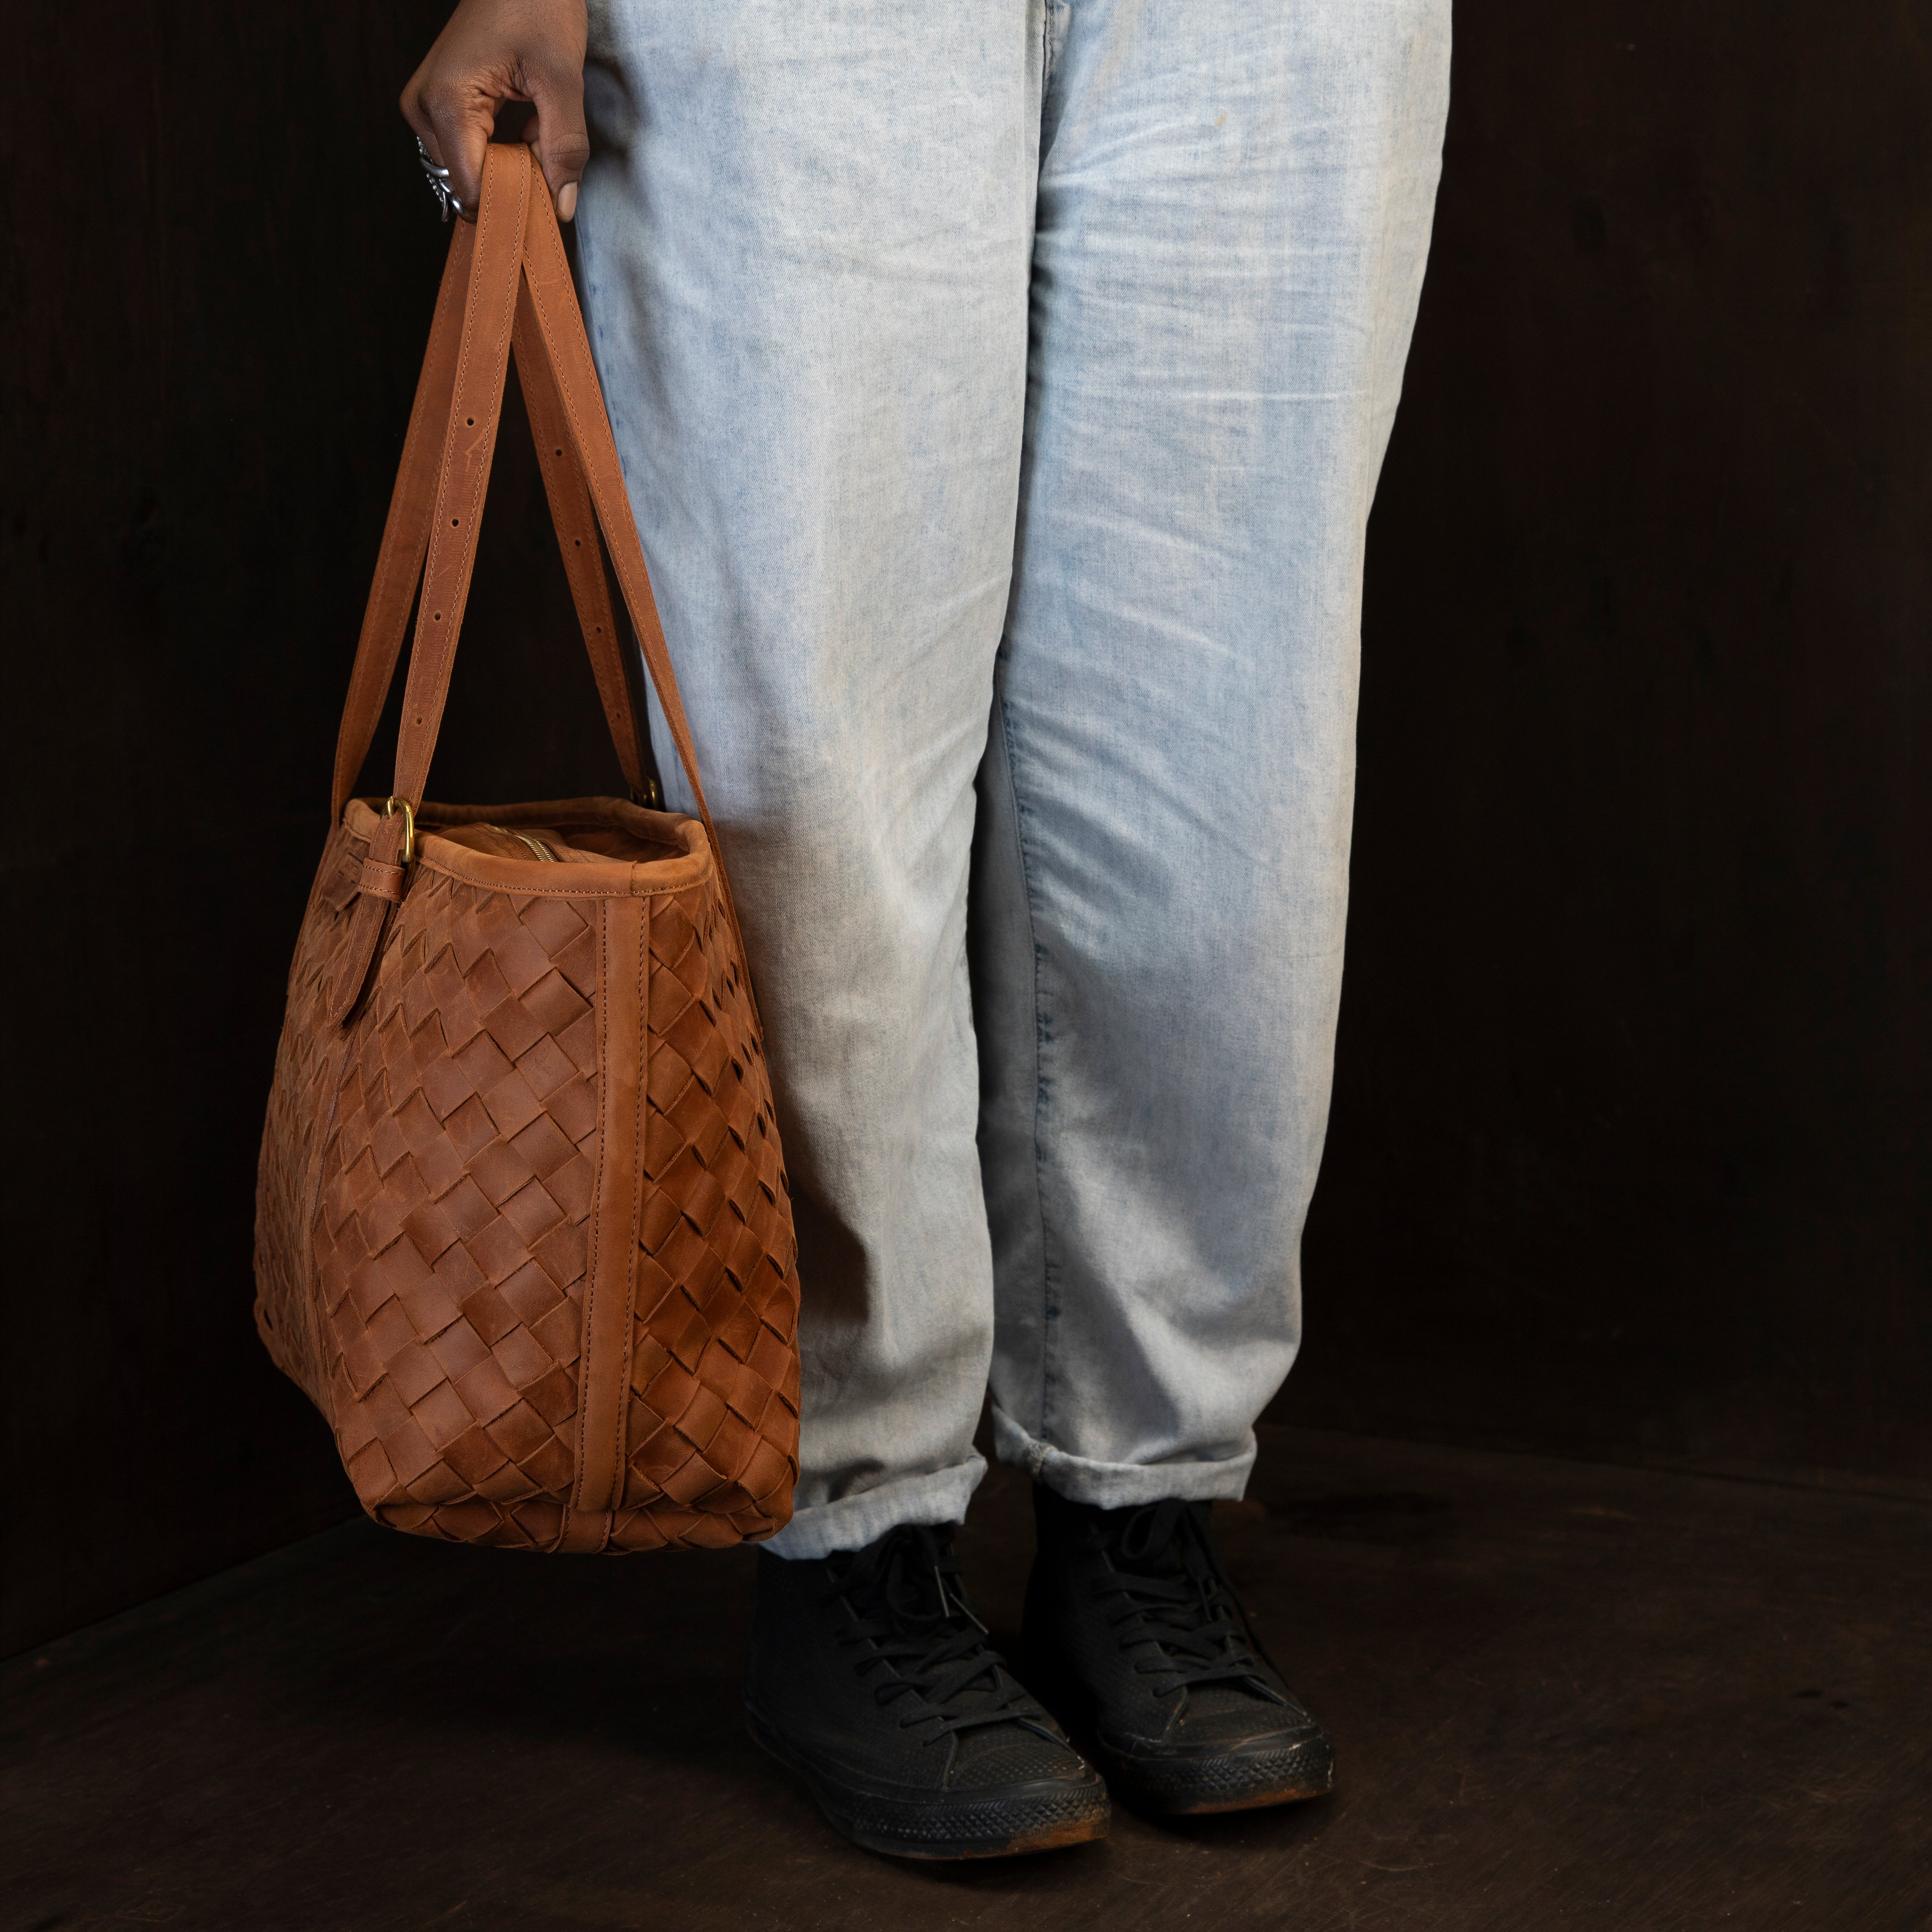 Pull-up Leather Weaved Tote